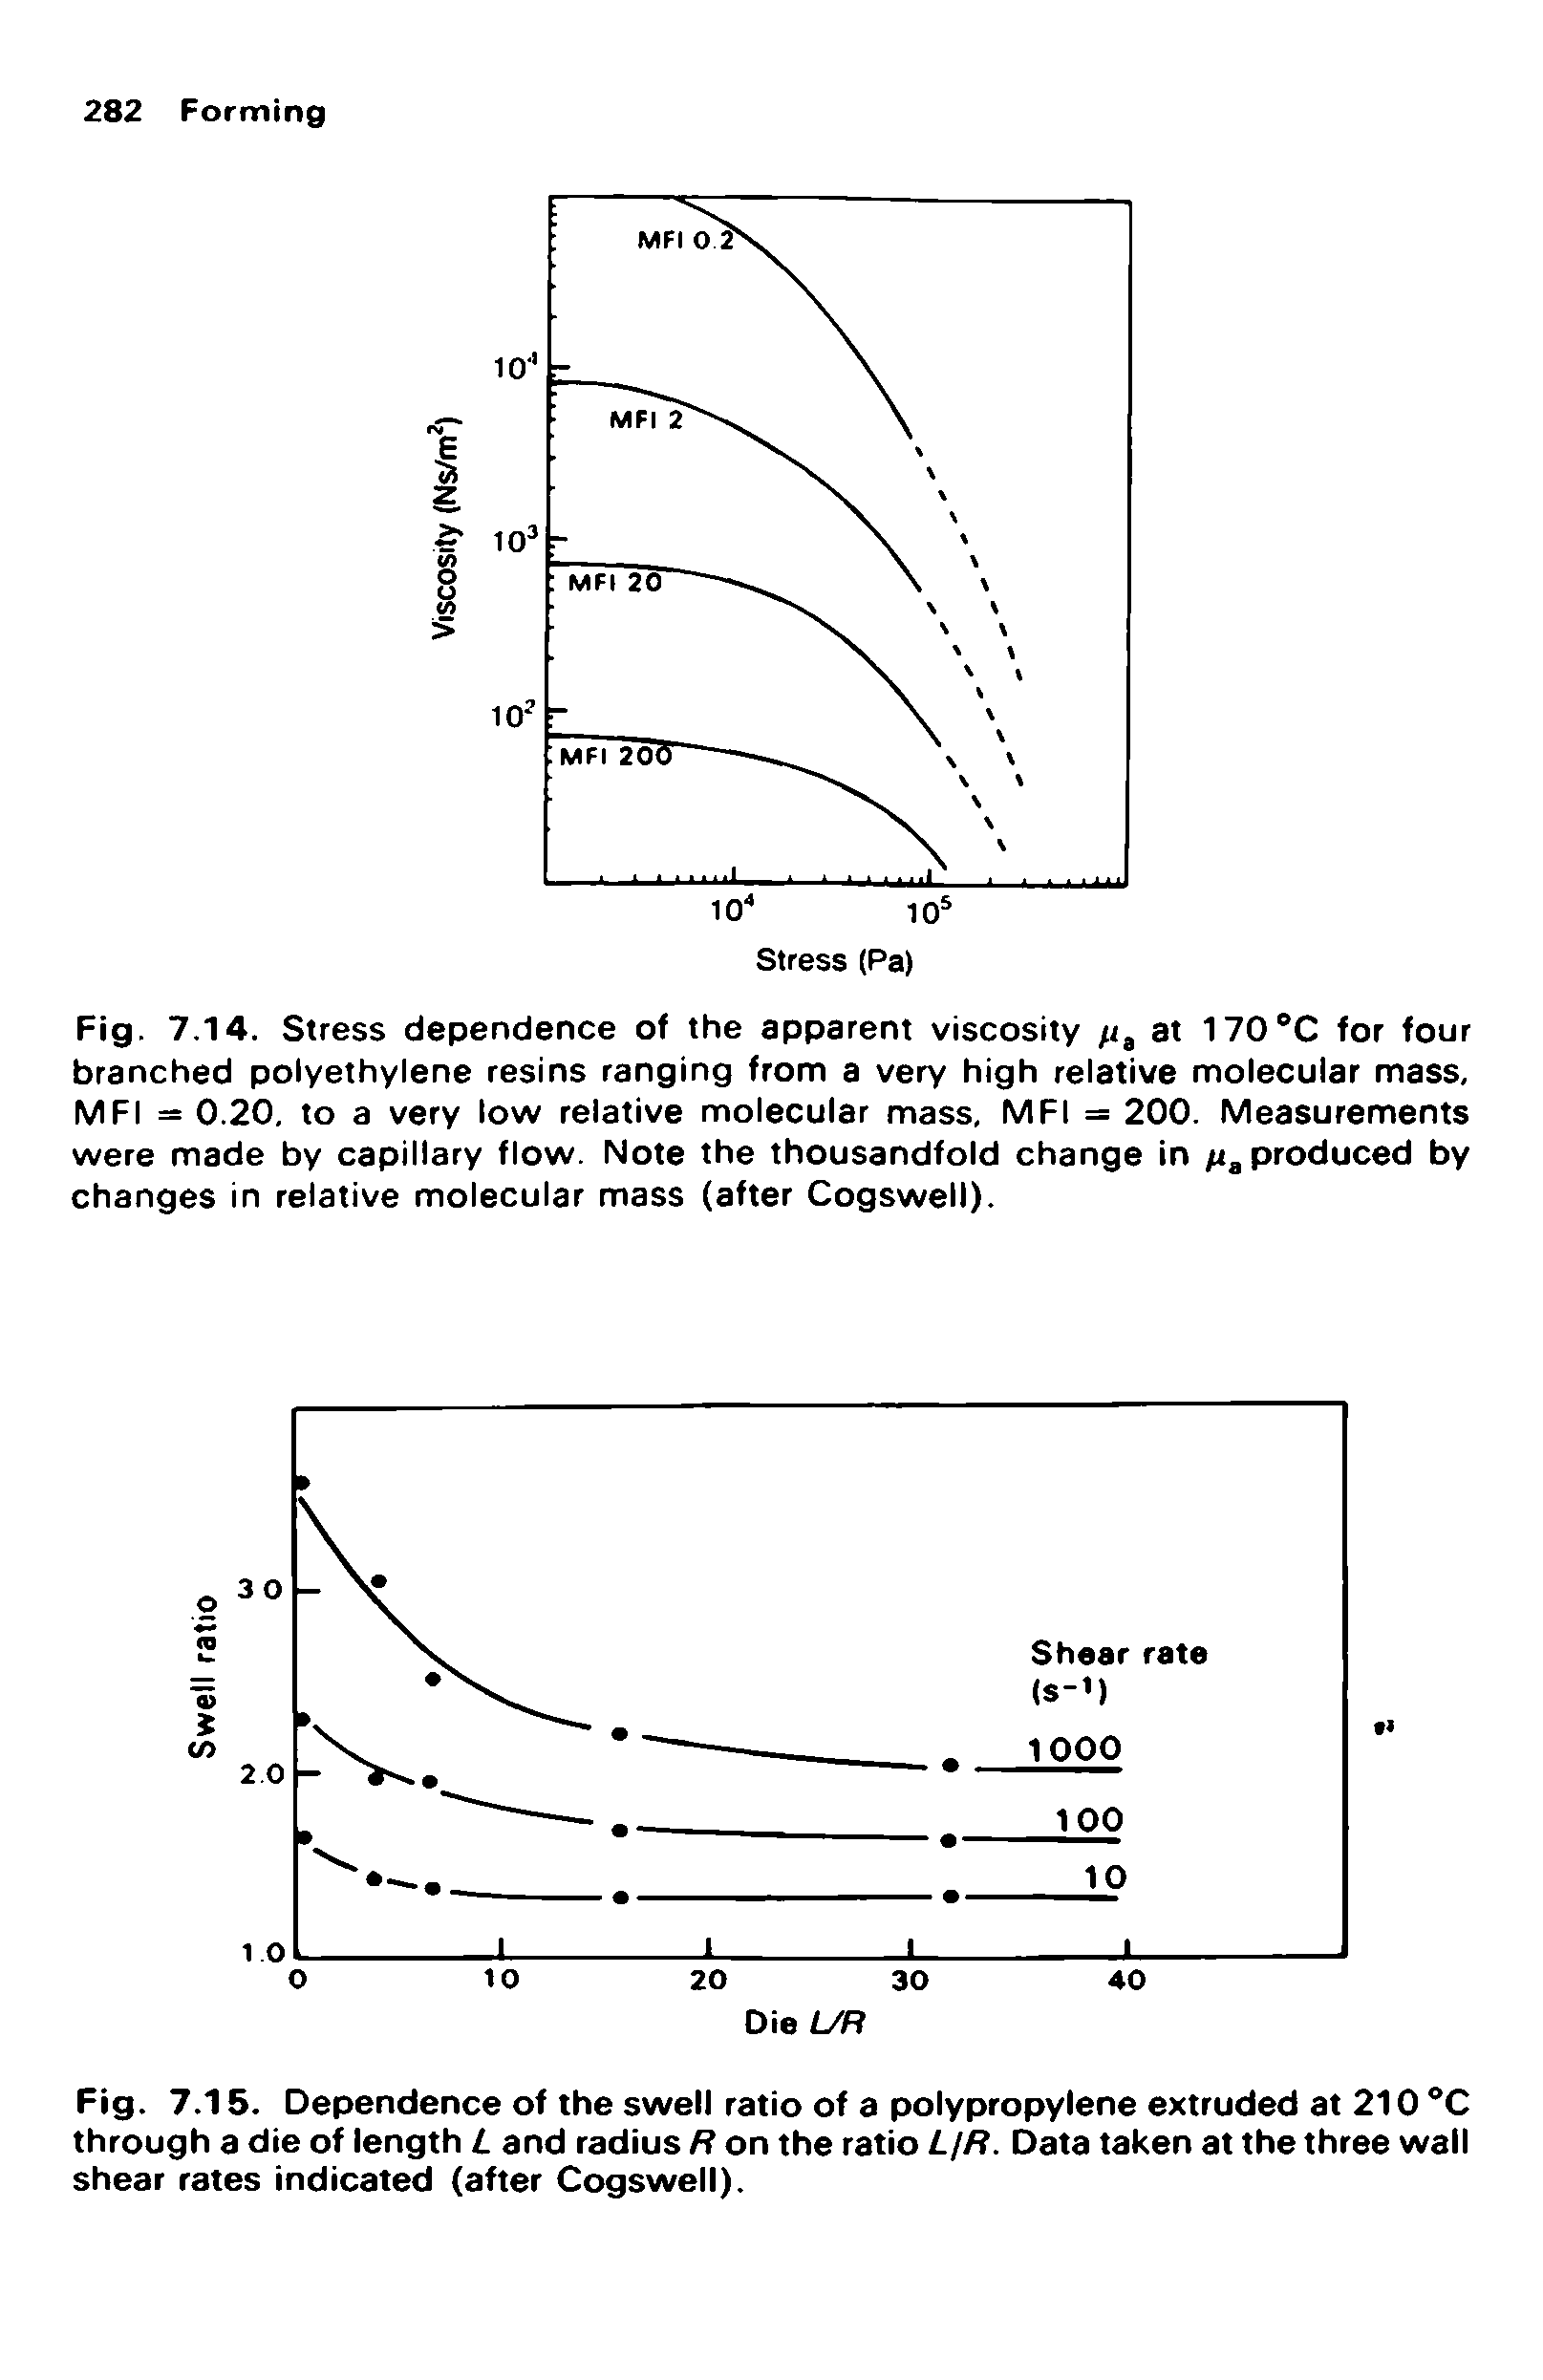 Fig. 7.14. Stress dependence of the apparent viscosity /i, at 170 C for four branched polyethylene resins ranging from a very high relative molecular mass, MFI — 0.20. to a very low relative molecular mass, MFI = 200. Measurements were made by capillary flow. Note the thousandfold change in /i, produced by changes in relative molecular mass (after Cogswell).